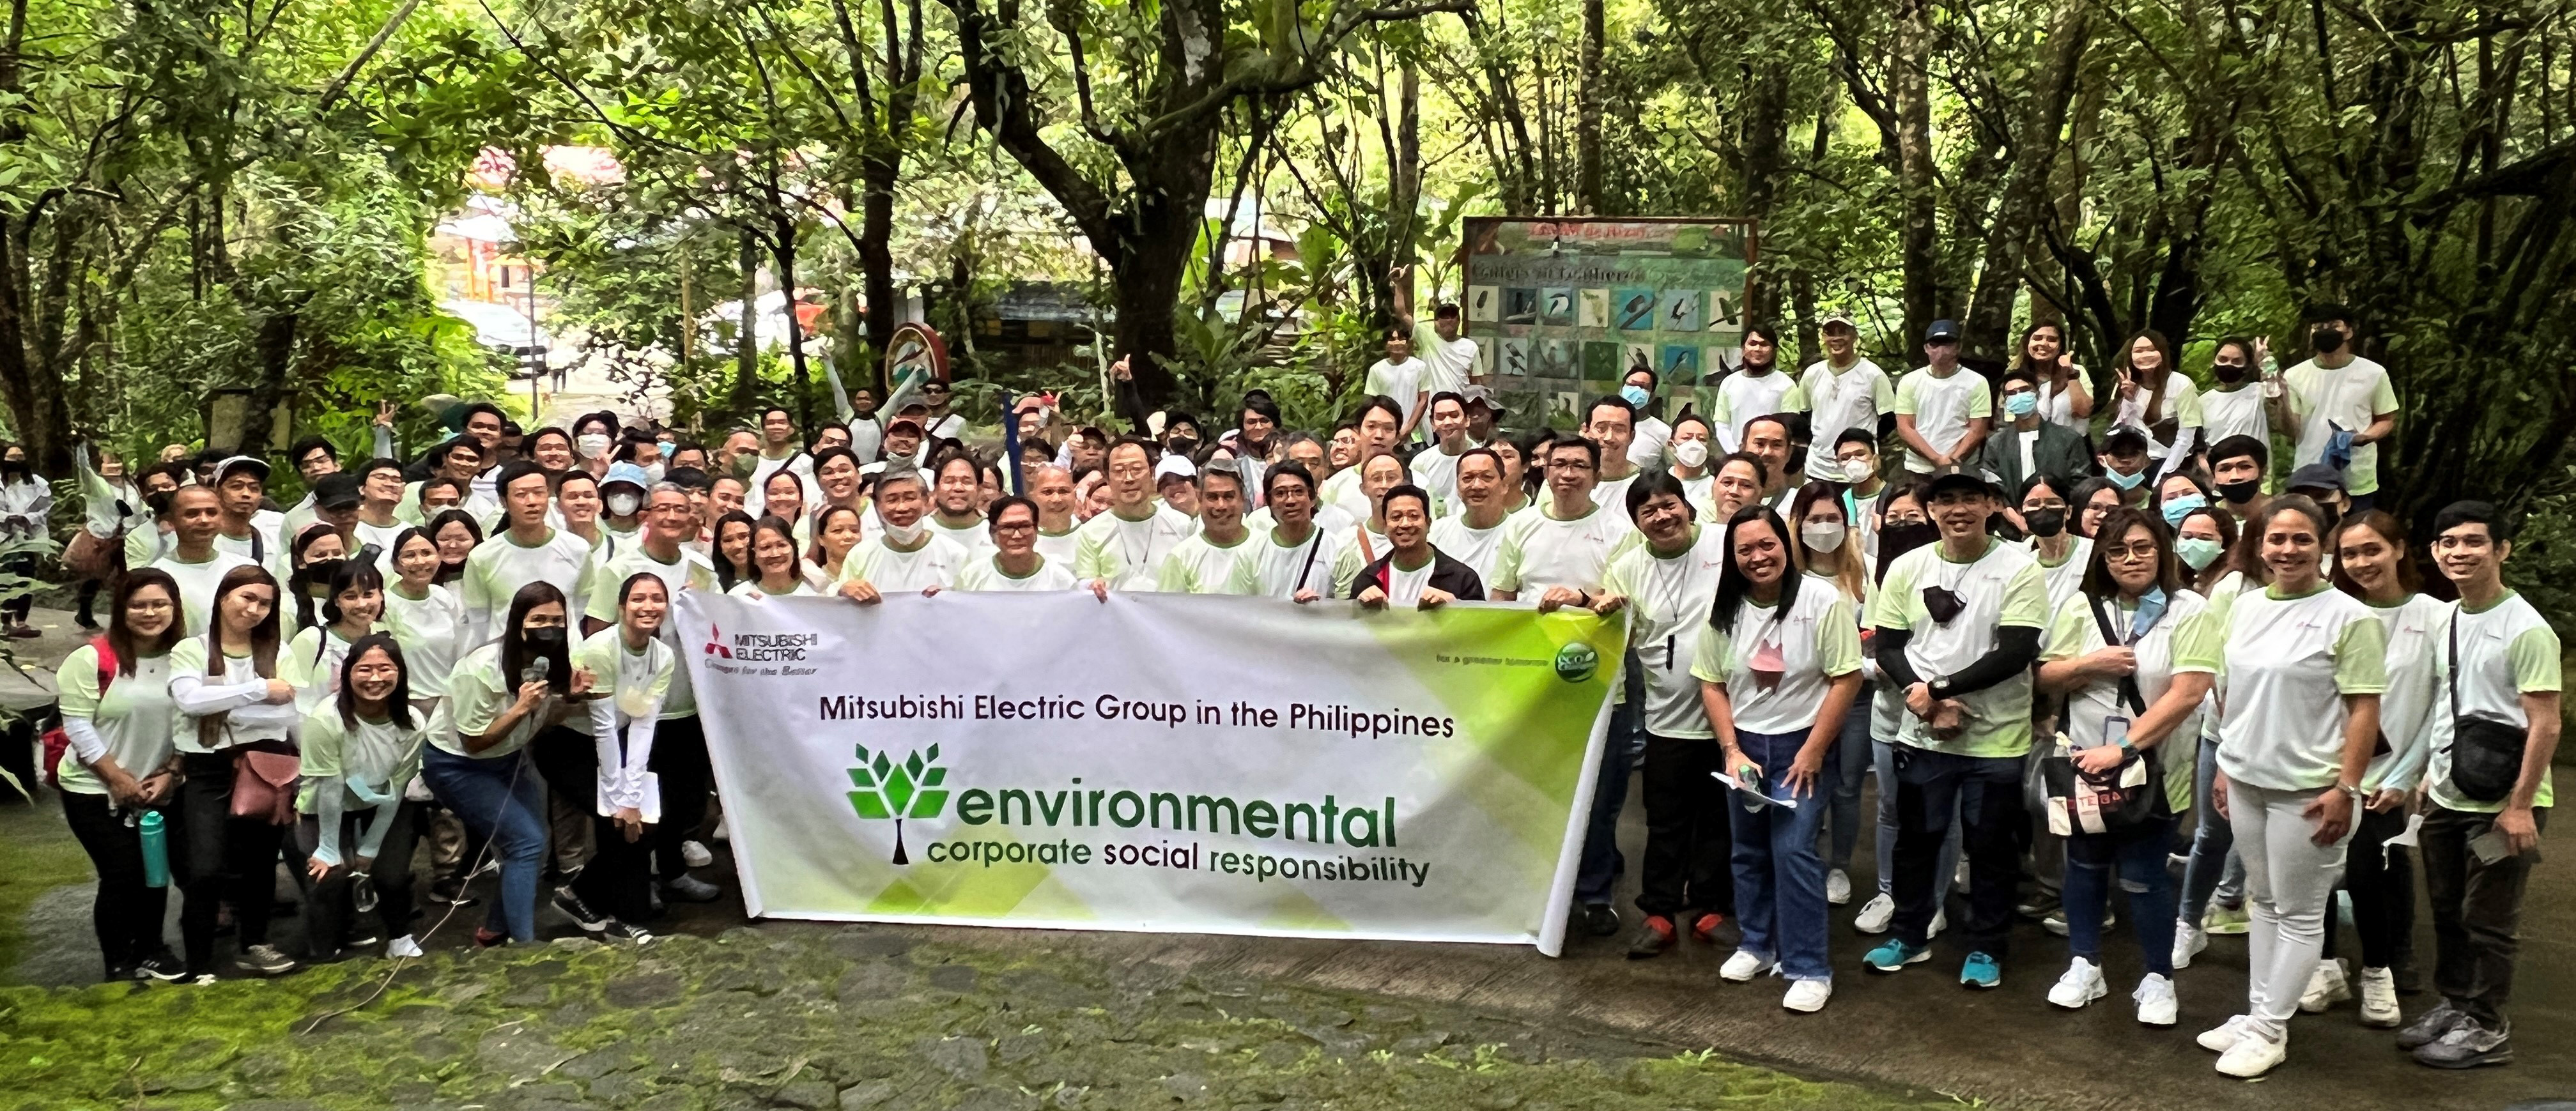 photo: Mitsubishi_Electric_in_the_Philippines_Corporate_Environmental_CSR